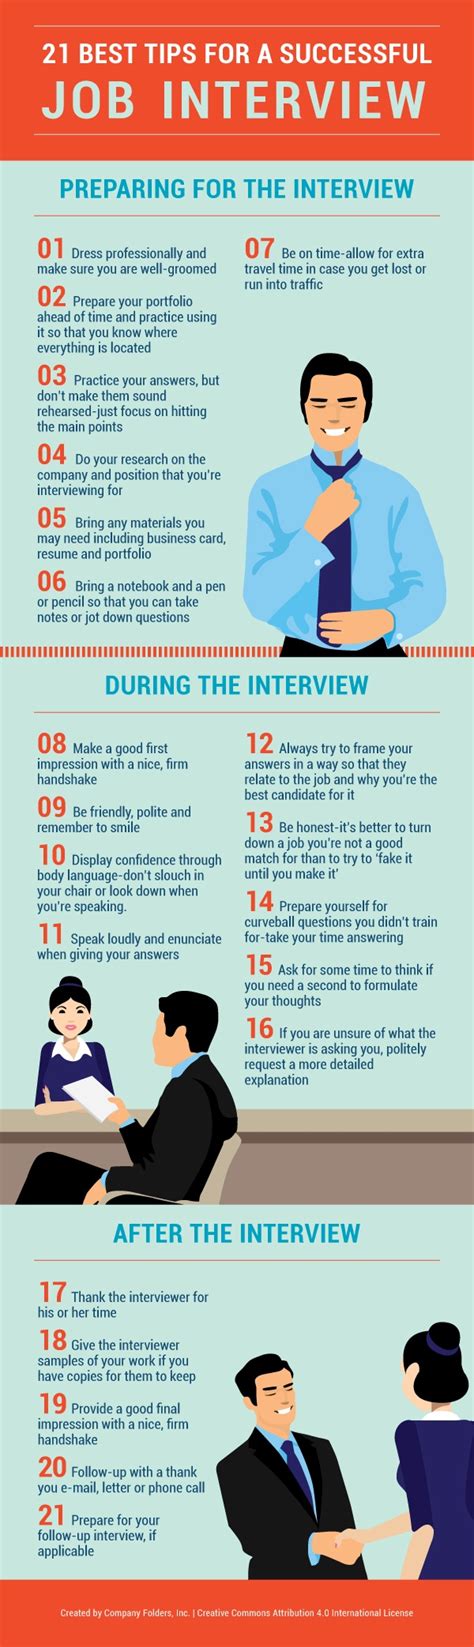 Interview a quick guide to winning the job interviews. - Hp officejet pro 8500 manuale utente.